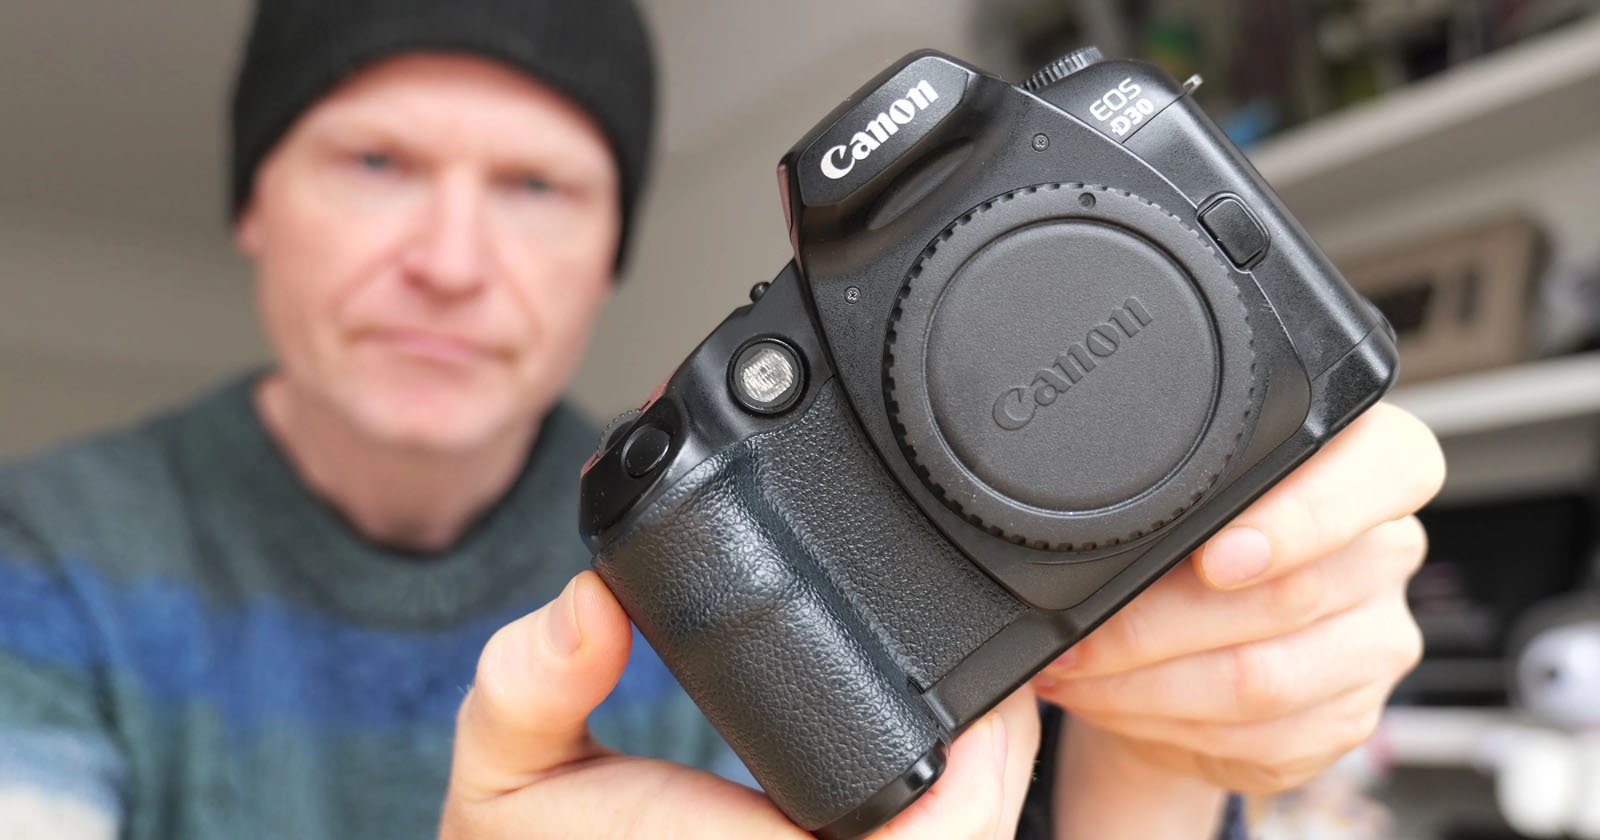 Canon EOS D30 Retro Review: The DSLR That Changed Everything